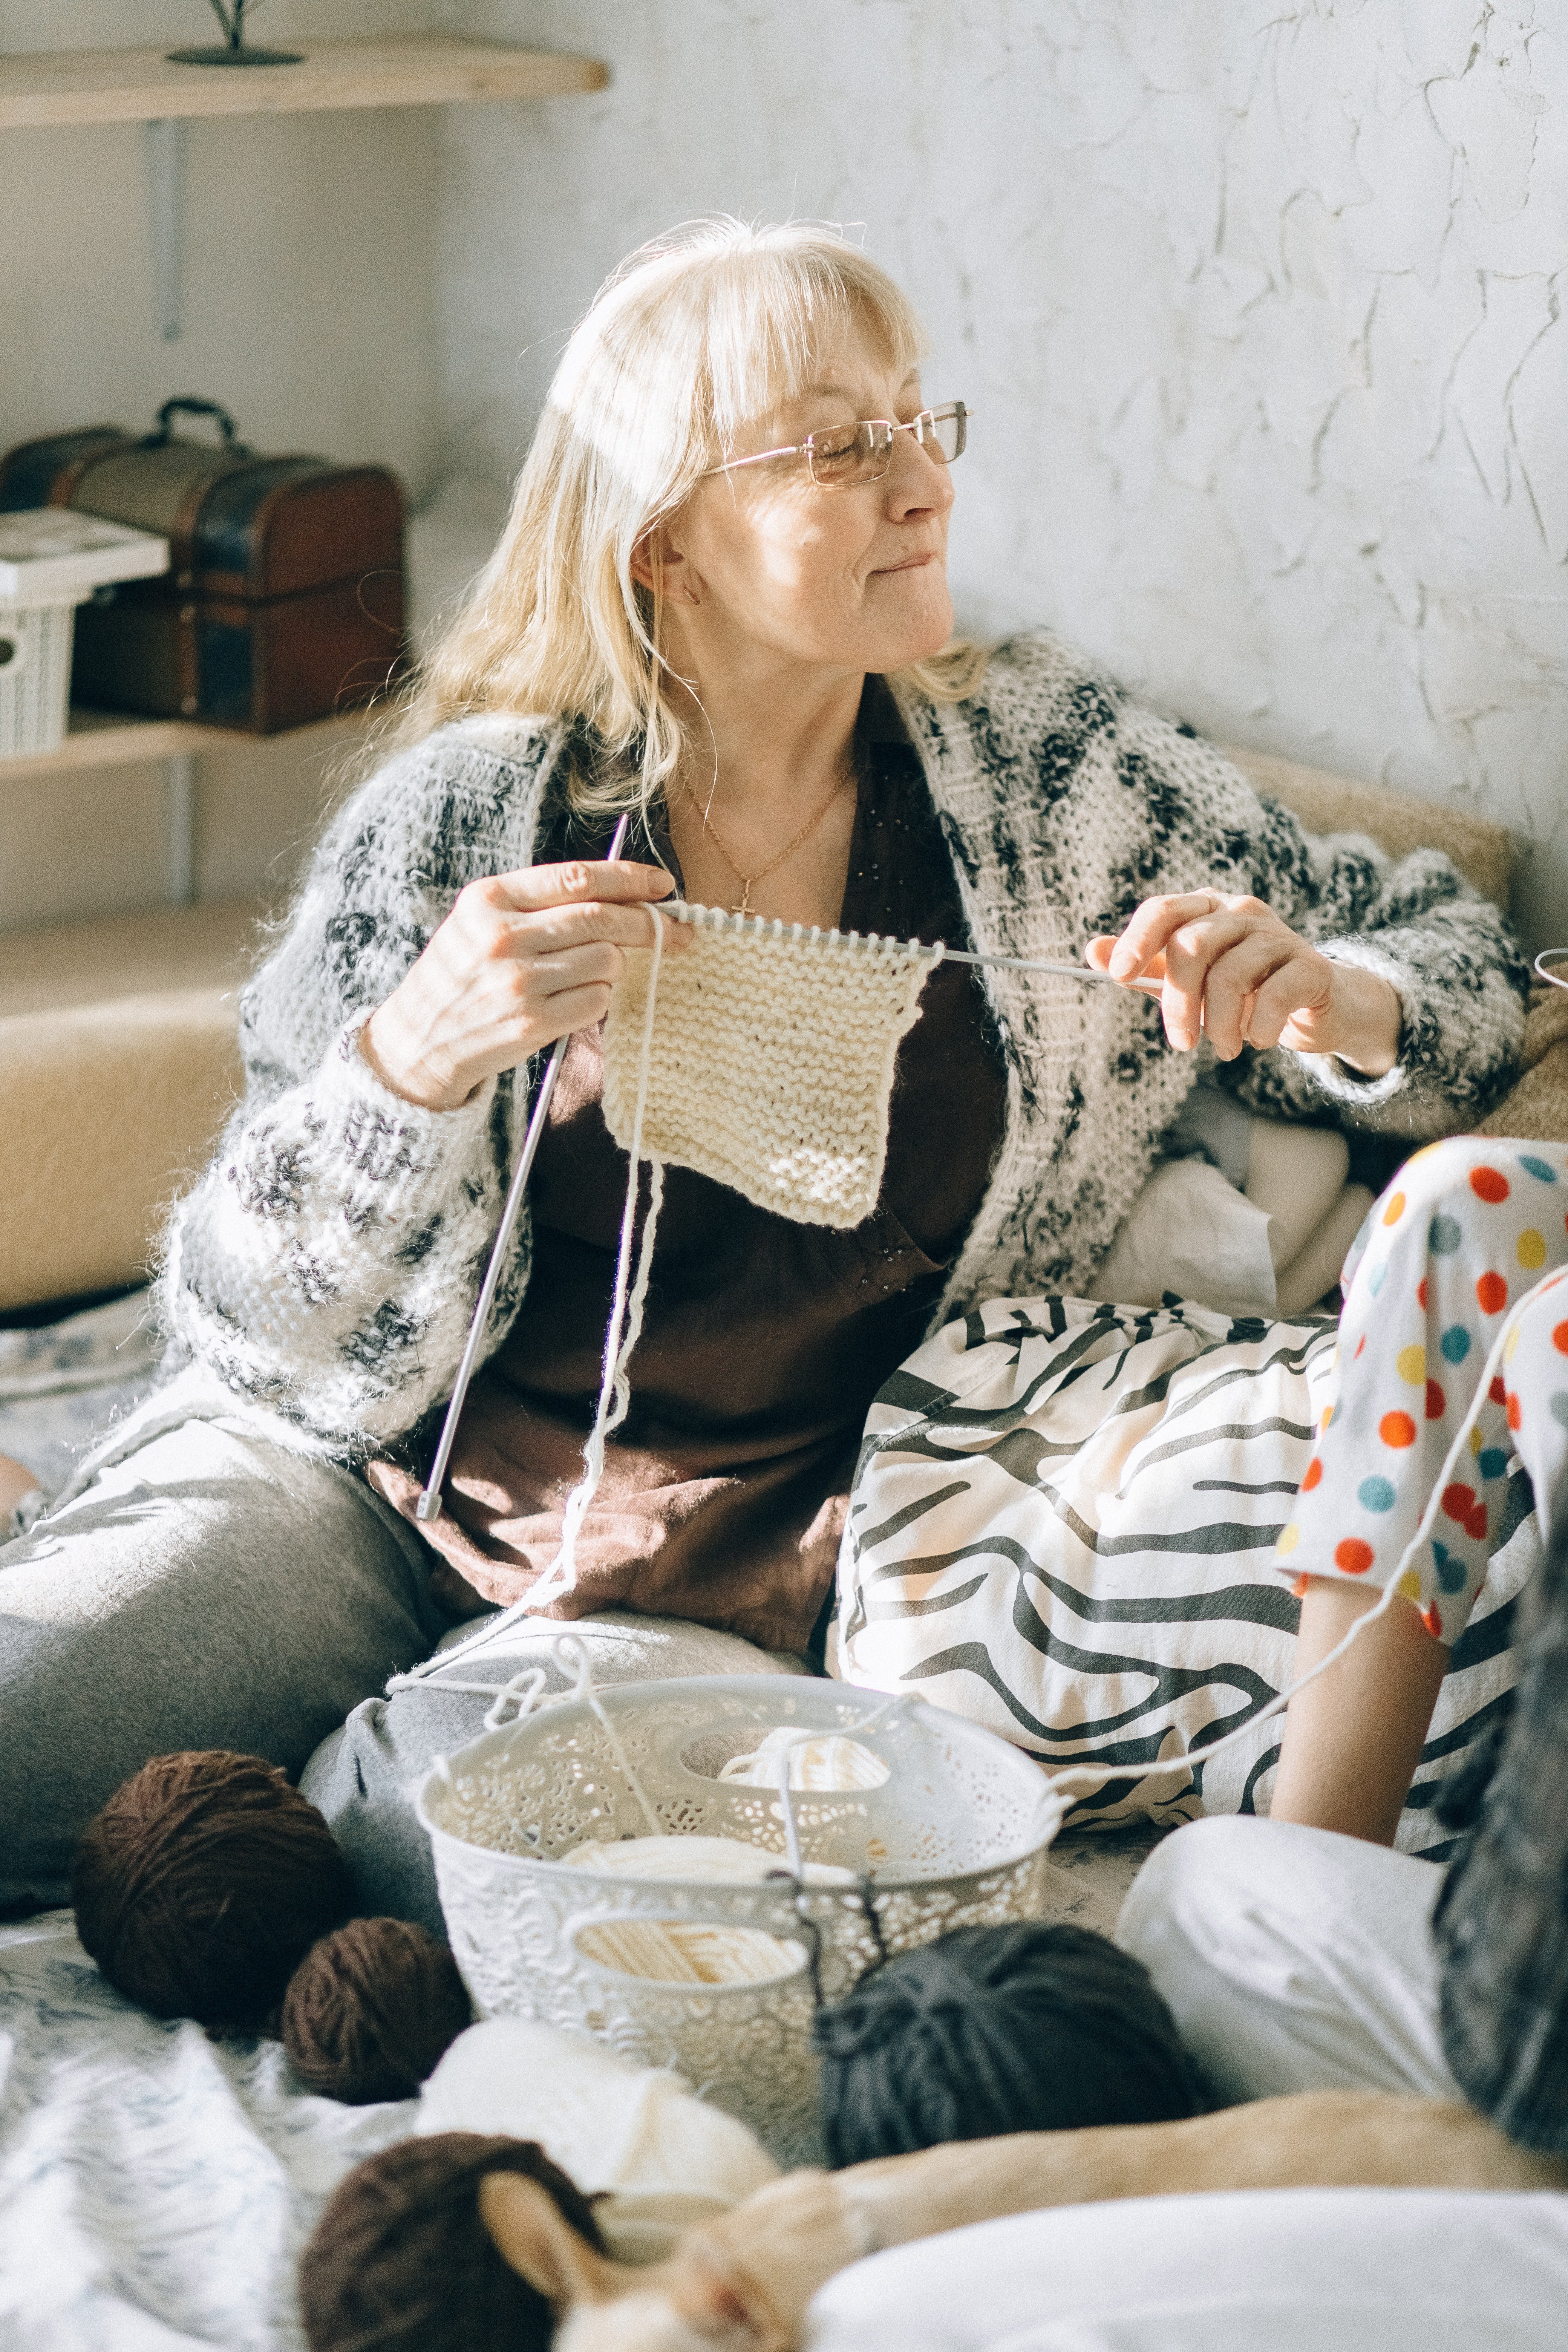 Edith was impressed by how quickly Alice learned to knit. | Source: Pexels